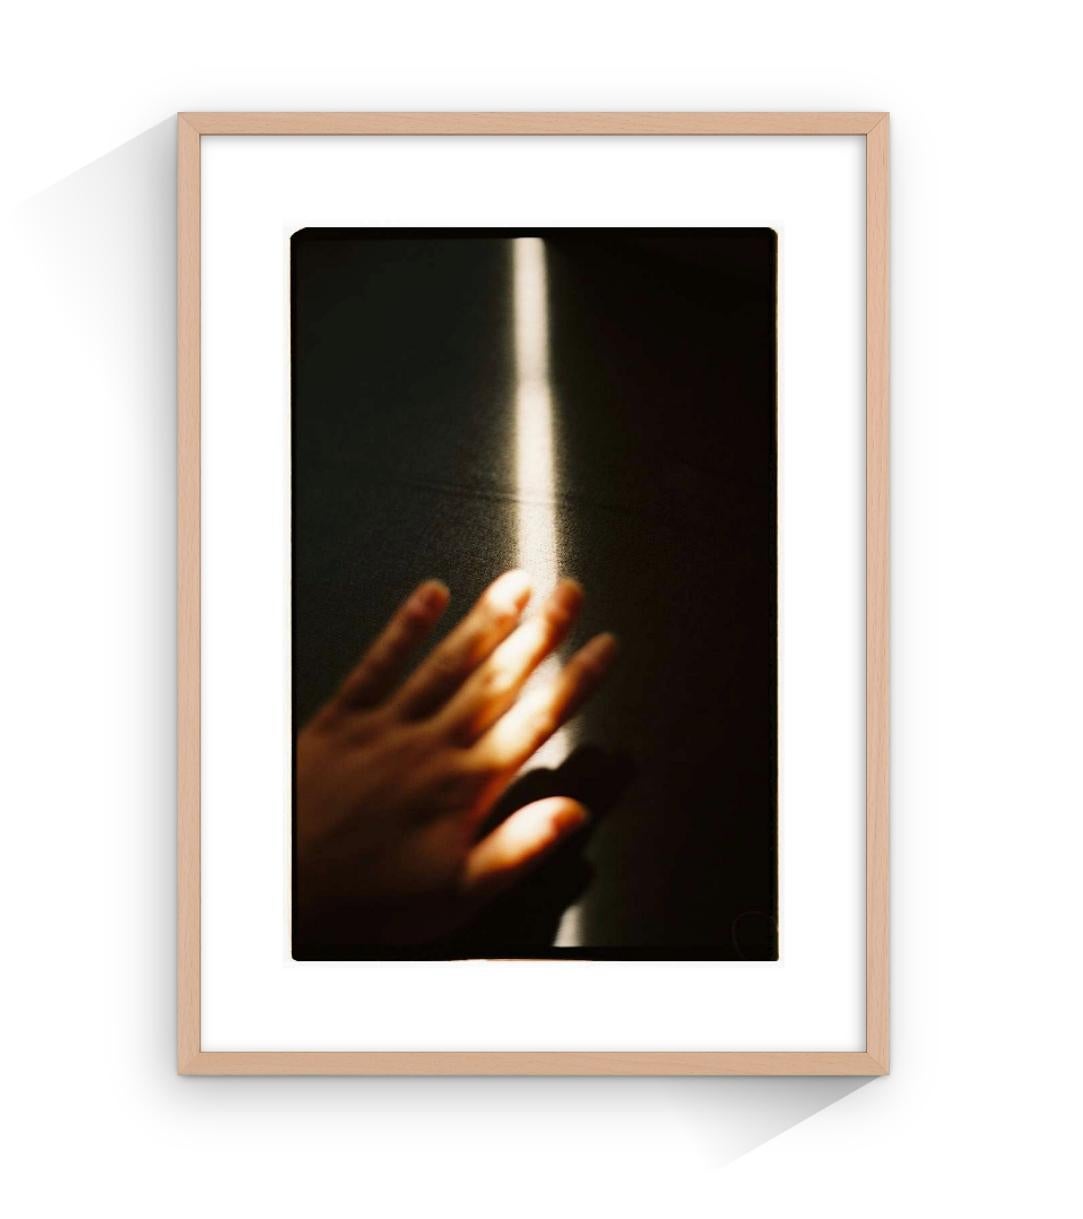 Infinite warm, hands, analog photography, natural light, cave, shelter - Photograph by Claudia Ferreiro